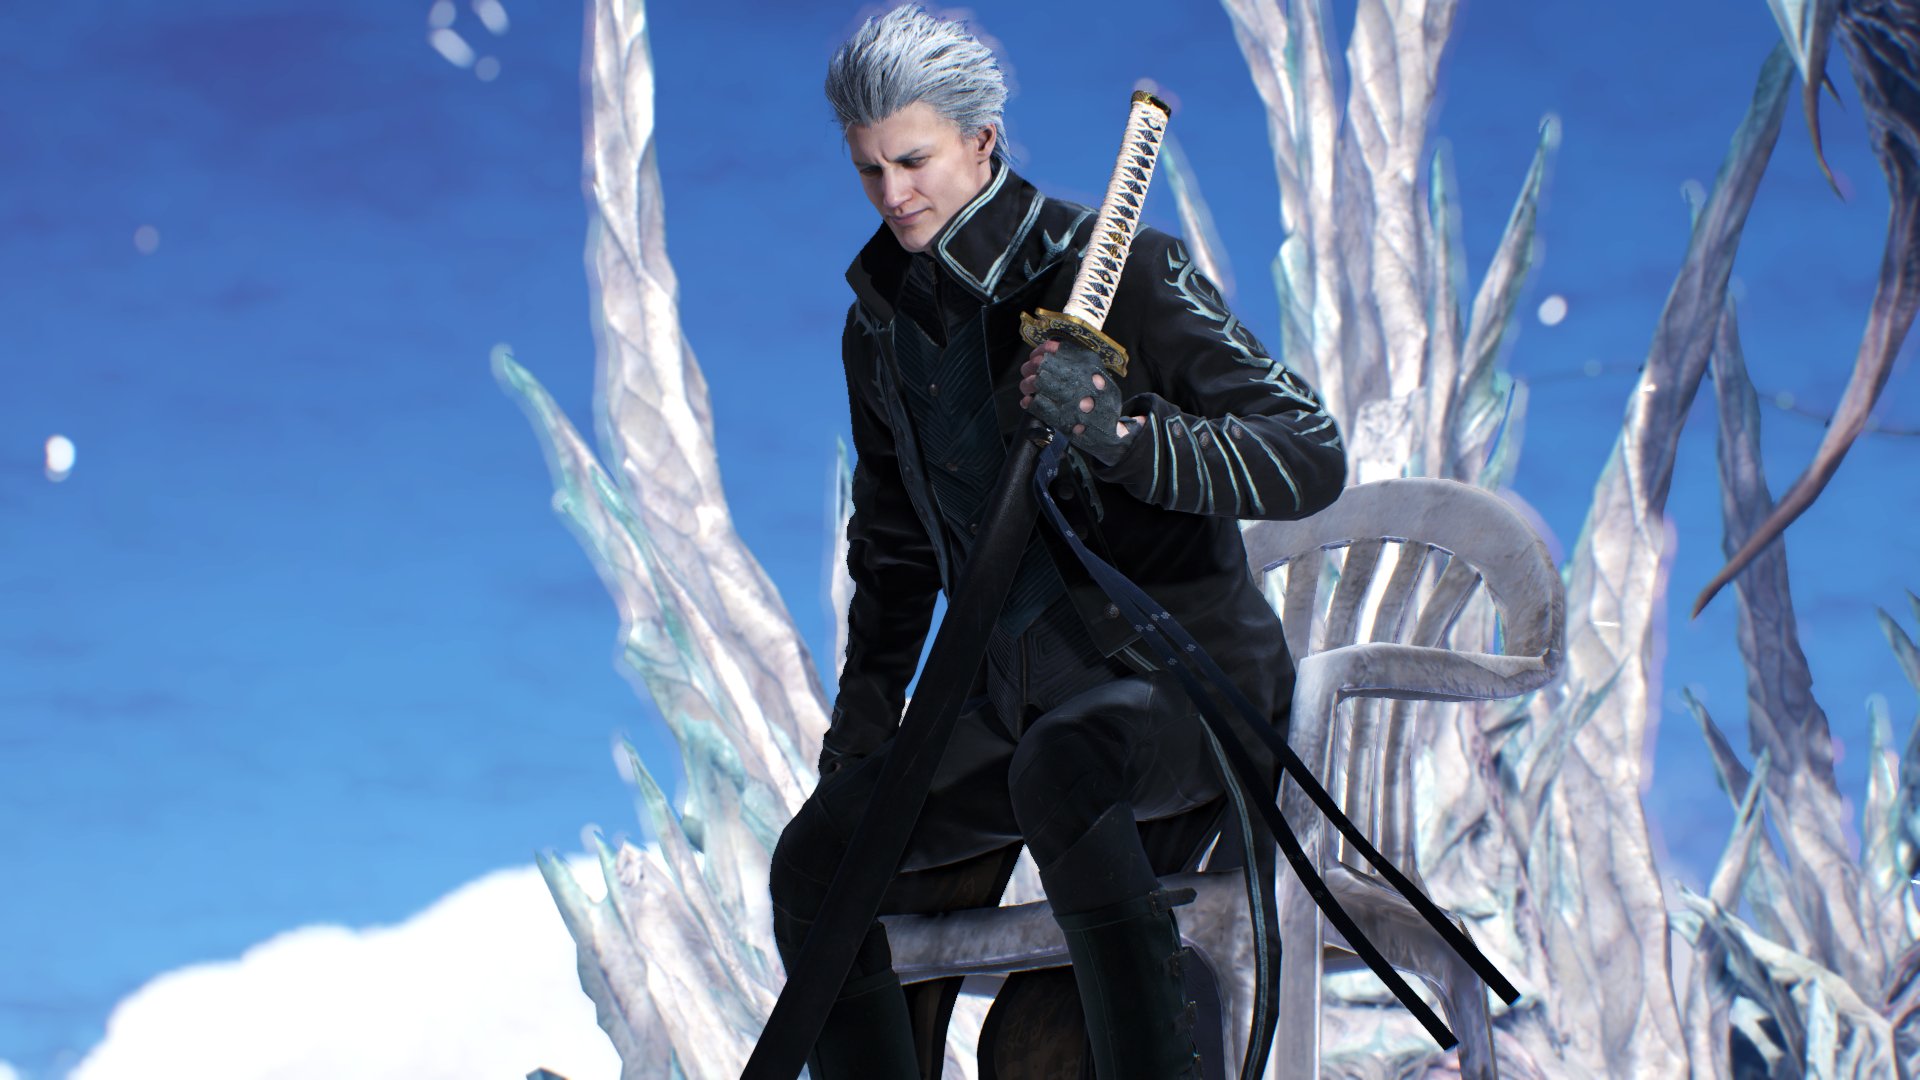 Drusoona (Vergil lover💙) on X: RT @SafK_Art: don't you all think Nero  deserves a plastic chair as well? #DevilMayCry #Nero #artwork #Vergil   / X